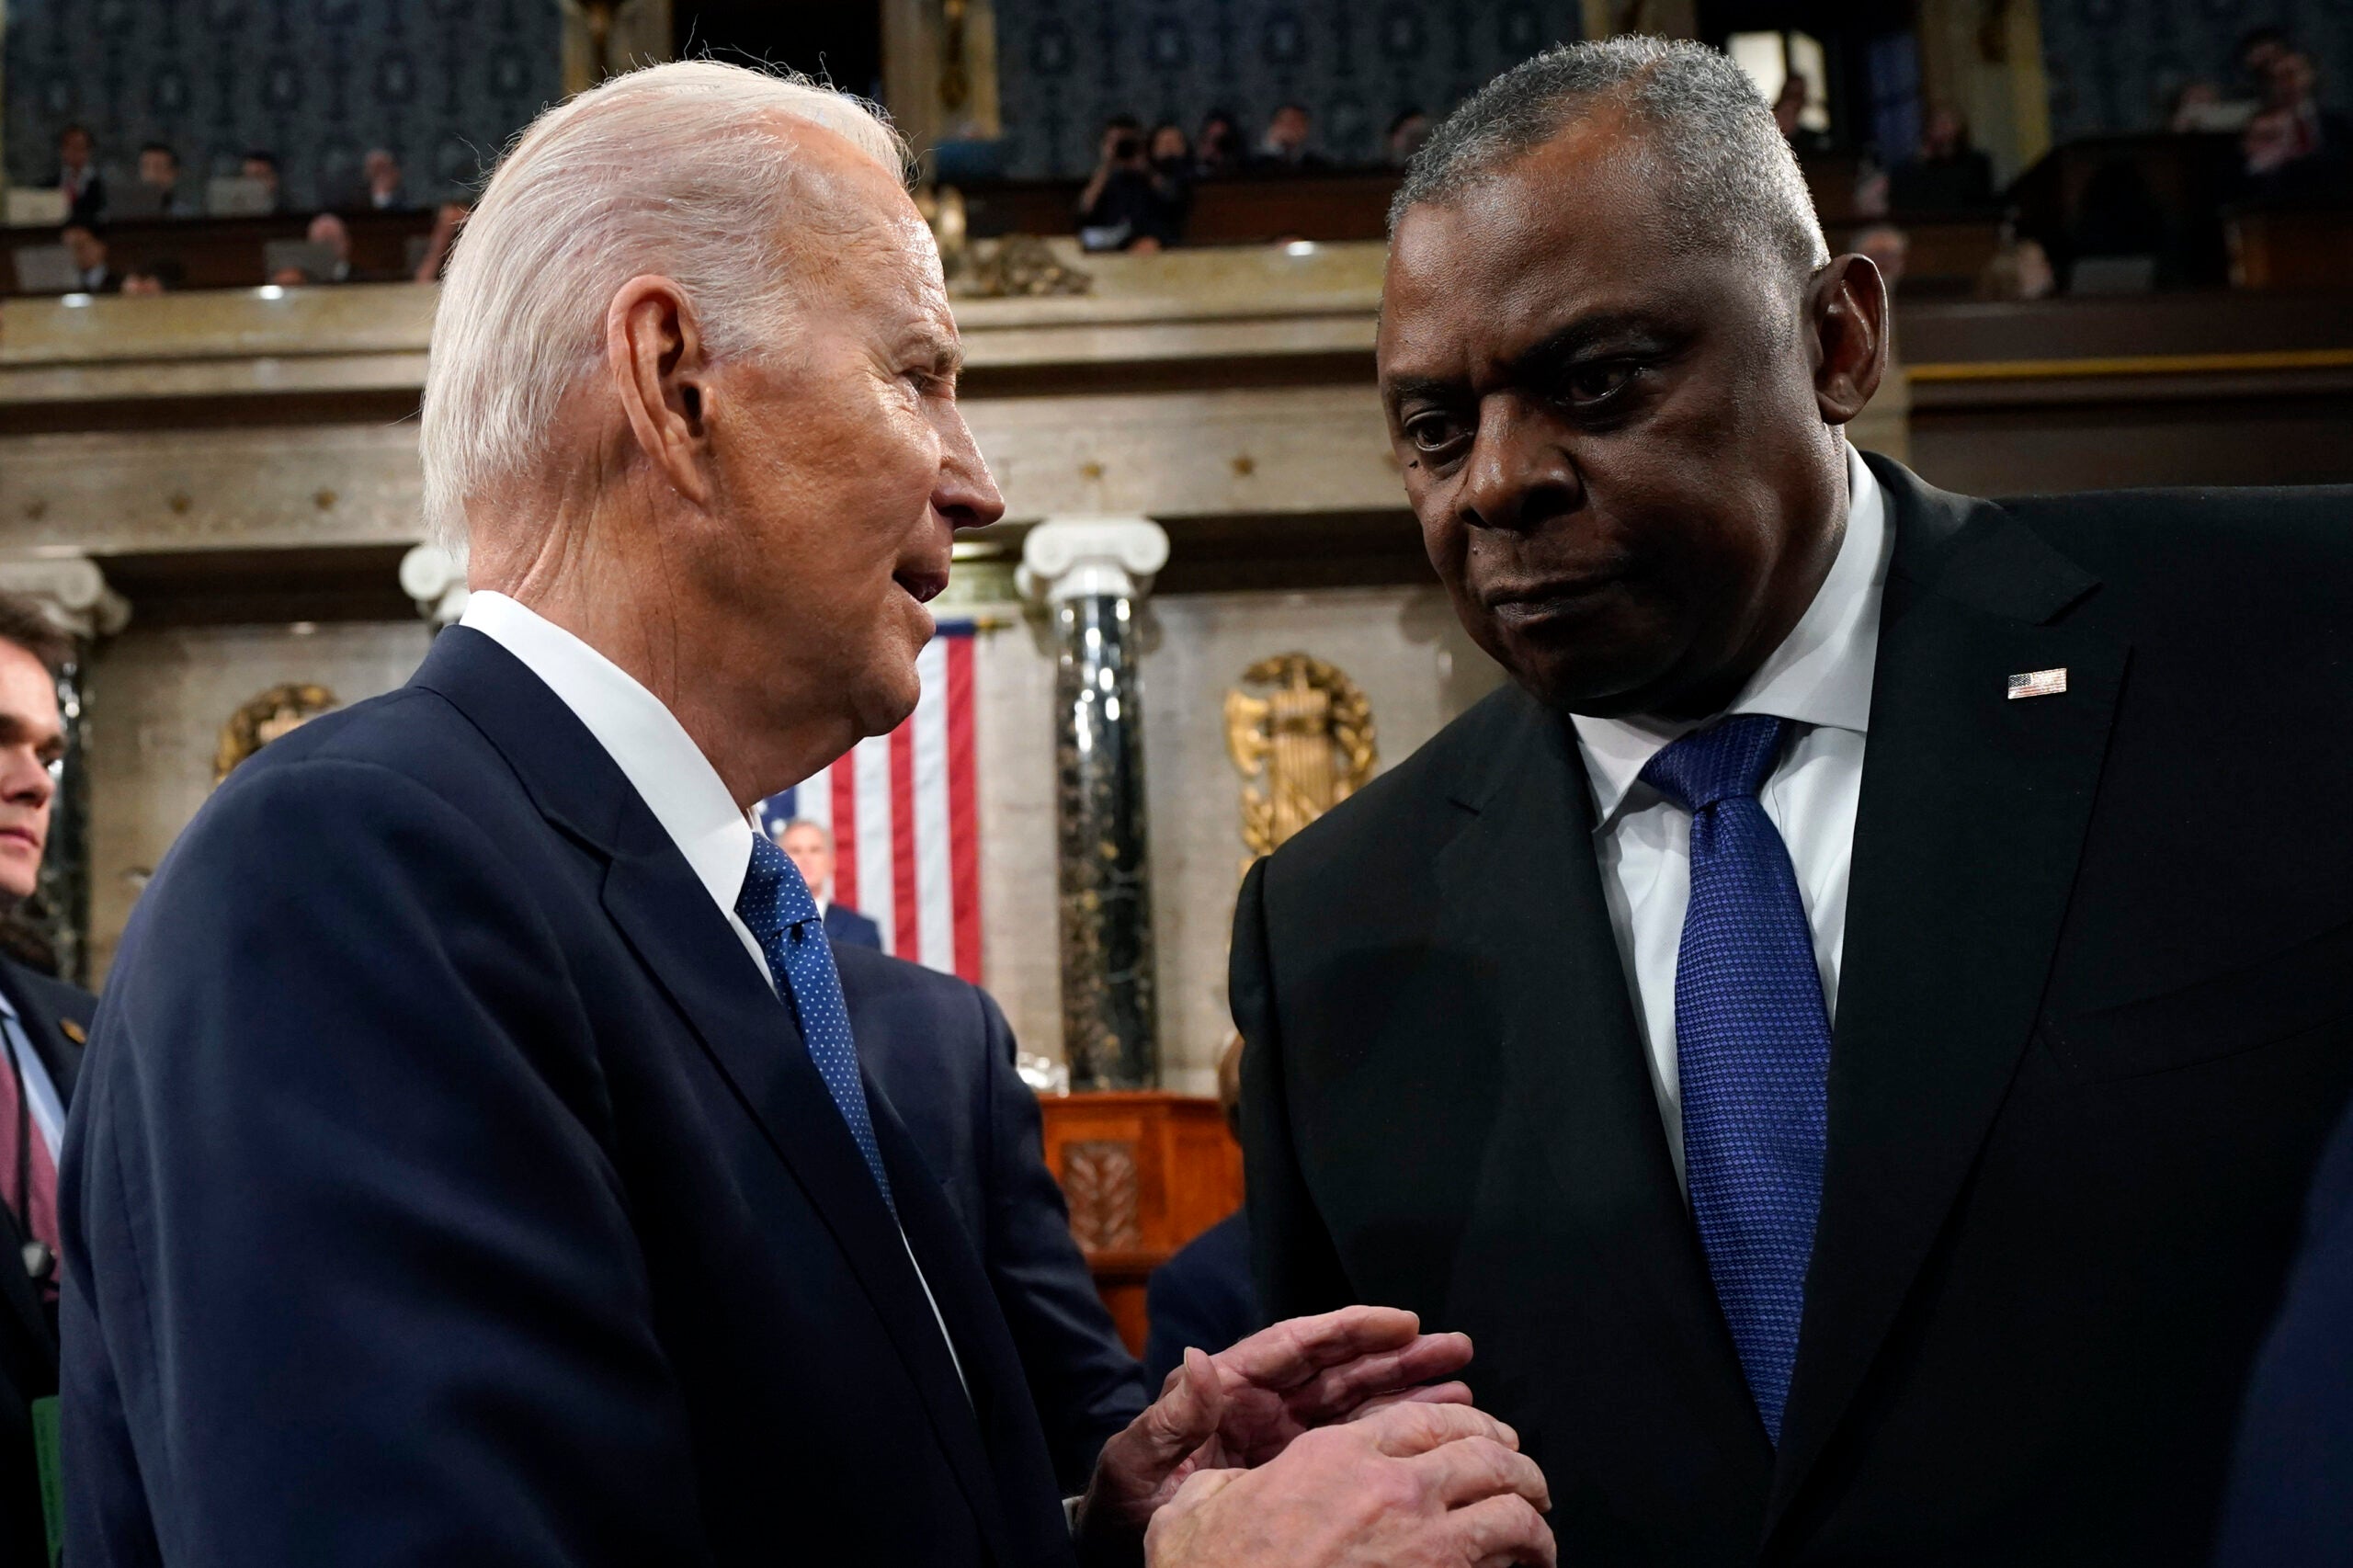 WASHINGTON, DC - FEBRUARY 07: U.S. President Joe Biden talks with Defense Secretary Lloyd Austin after delivering the State of the Union address on February 7, 2023 in the House Chamber of the U.S. Capitol in Washington, DC. The speech marks Biden's first address to the new Republican-controlled House. (Photo by Jacquelyn Martin-Pool/Getty Images)